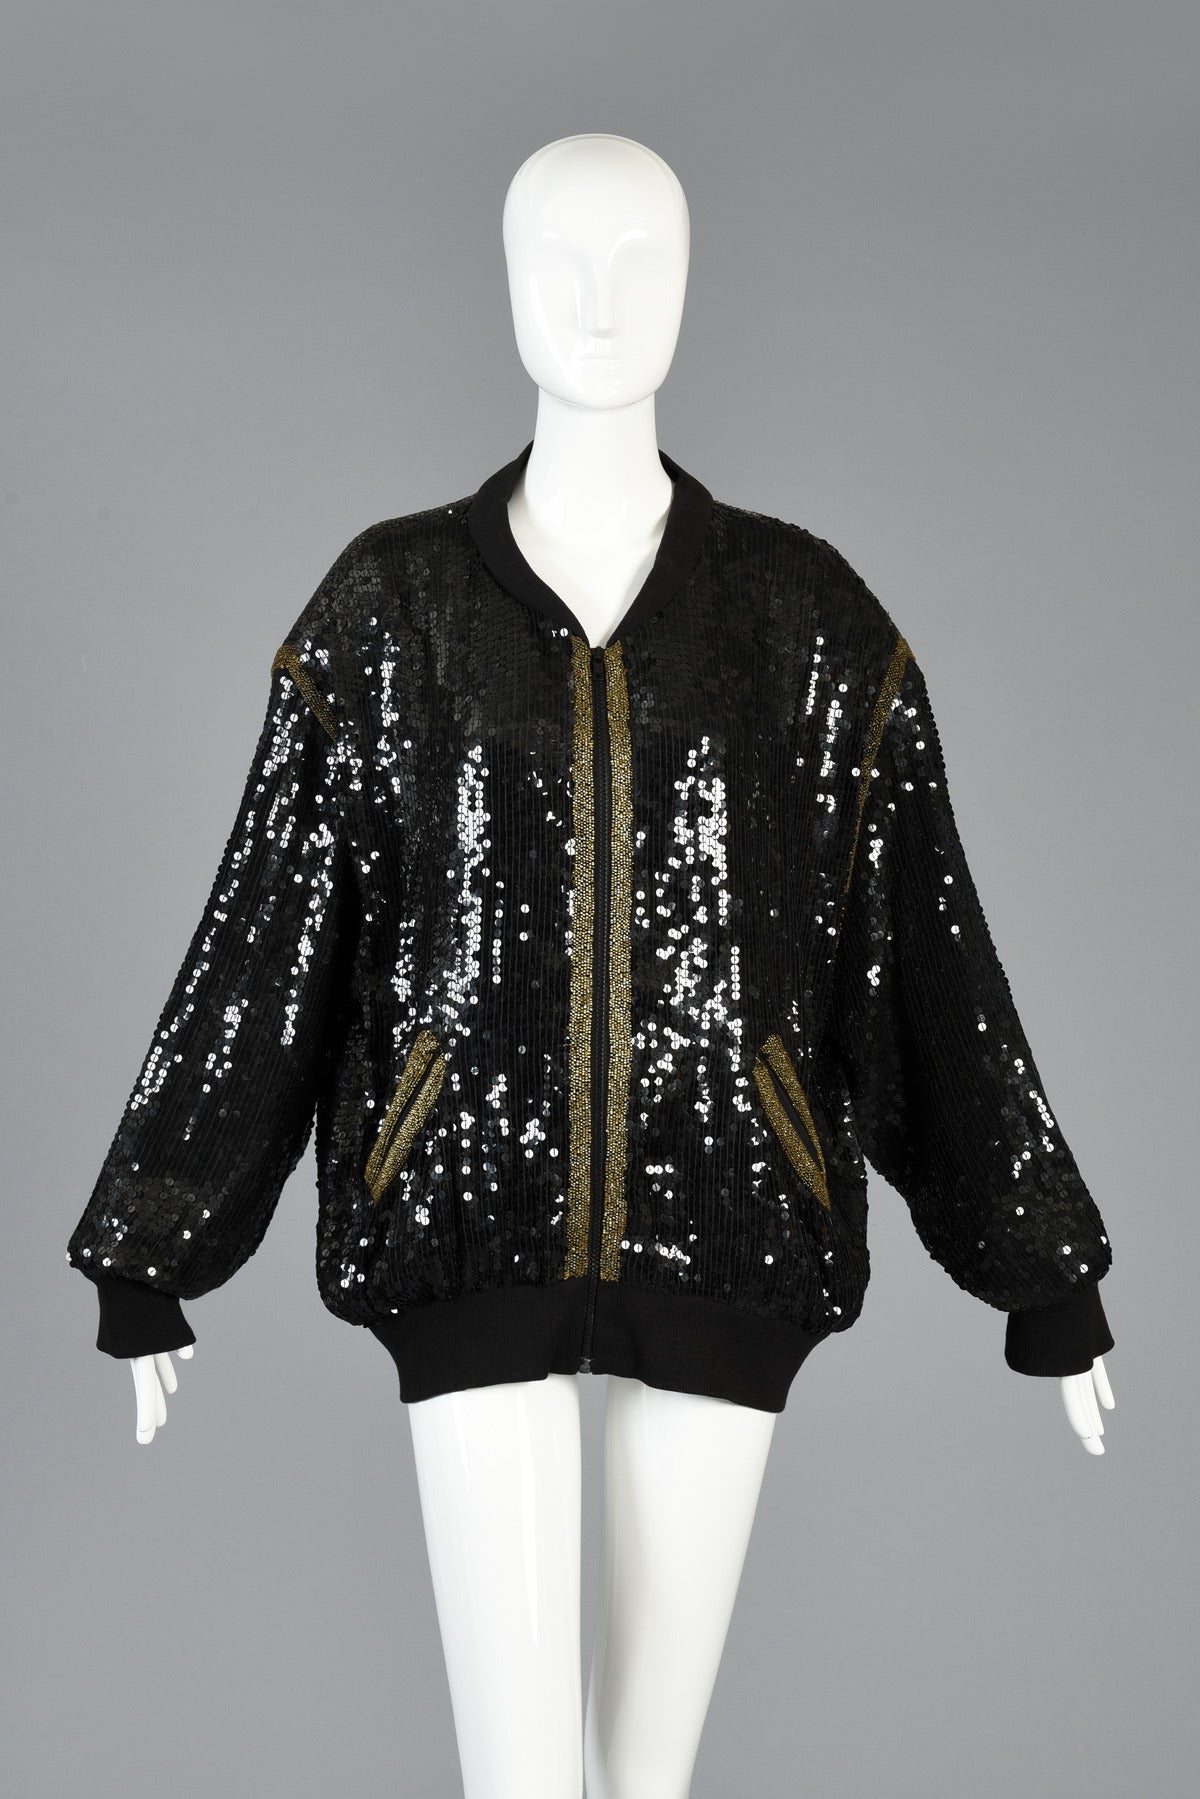 Incredible 1980s fully sequined black silk bomber jacket with massive indian chief head on the back! Gold striping details around the zippered pockets + shoulders. Huge indian head is fully sequined with beaded fringe hanging from the head dress.